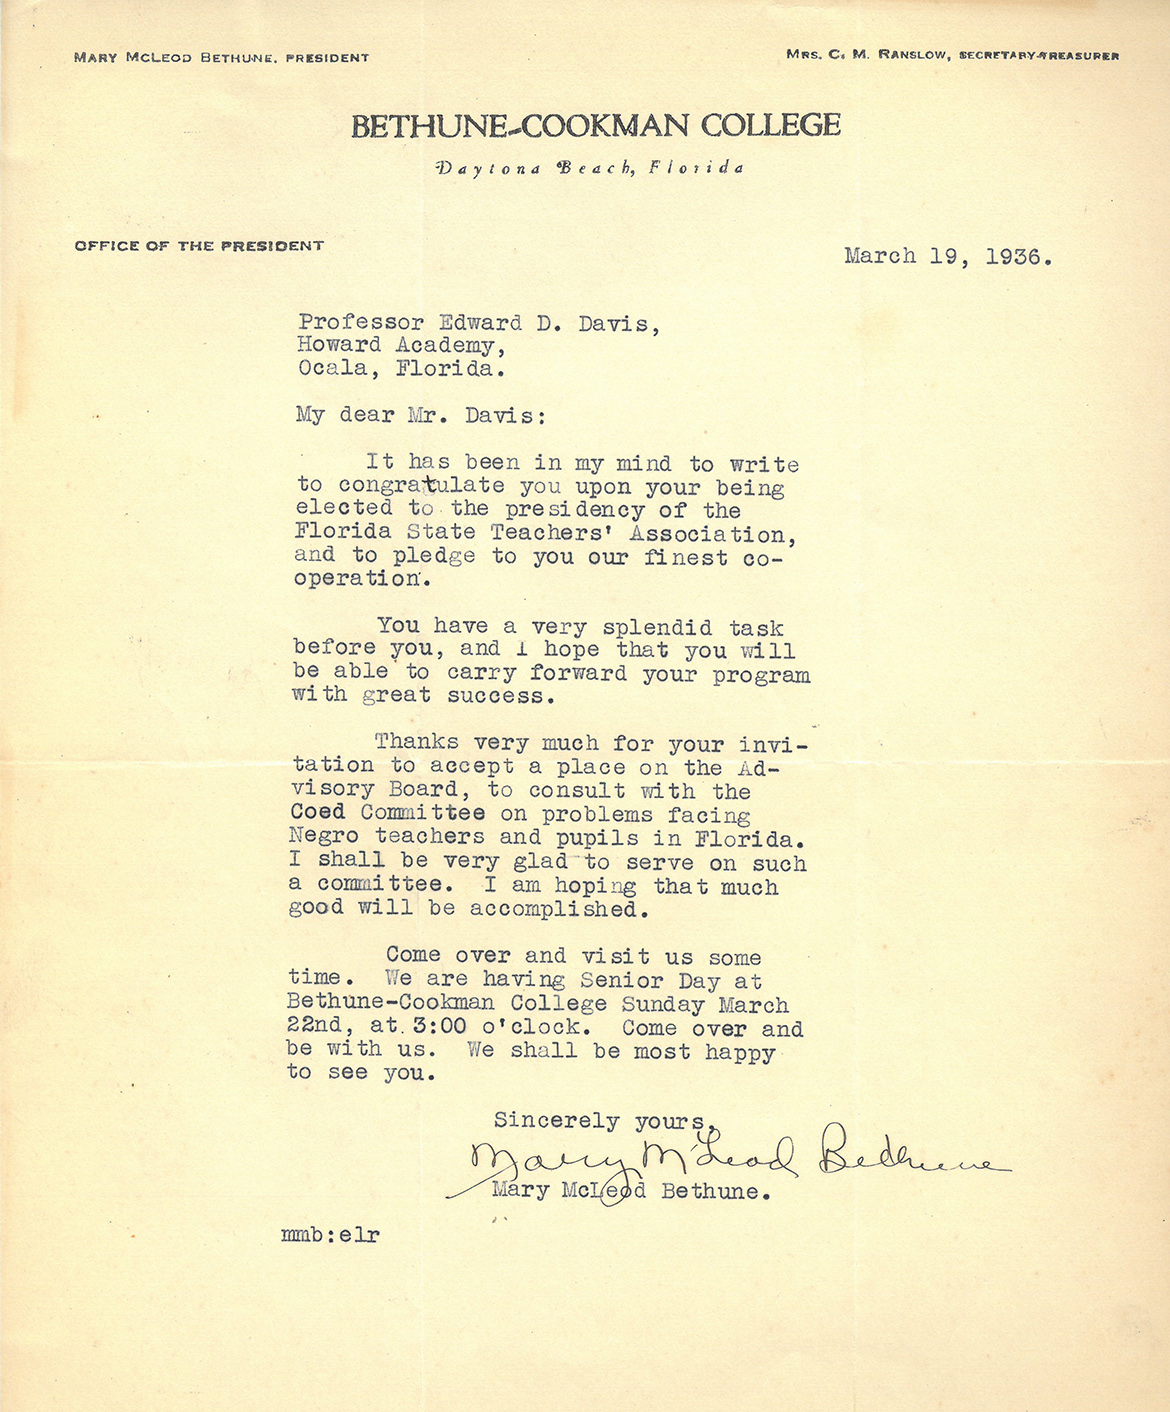 Letters to Mr. Davis from various historic figures including Martin Luther King, Jr., Mary McLeod Bethune and Thurgood Marshall, courtesy of Daniel Banks